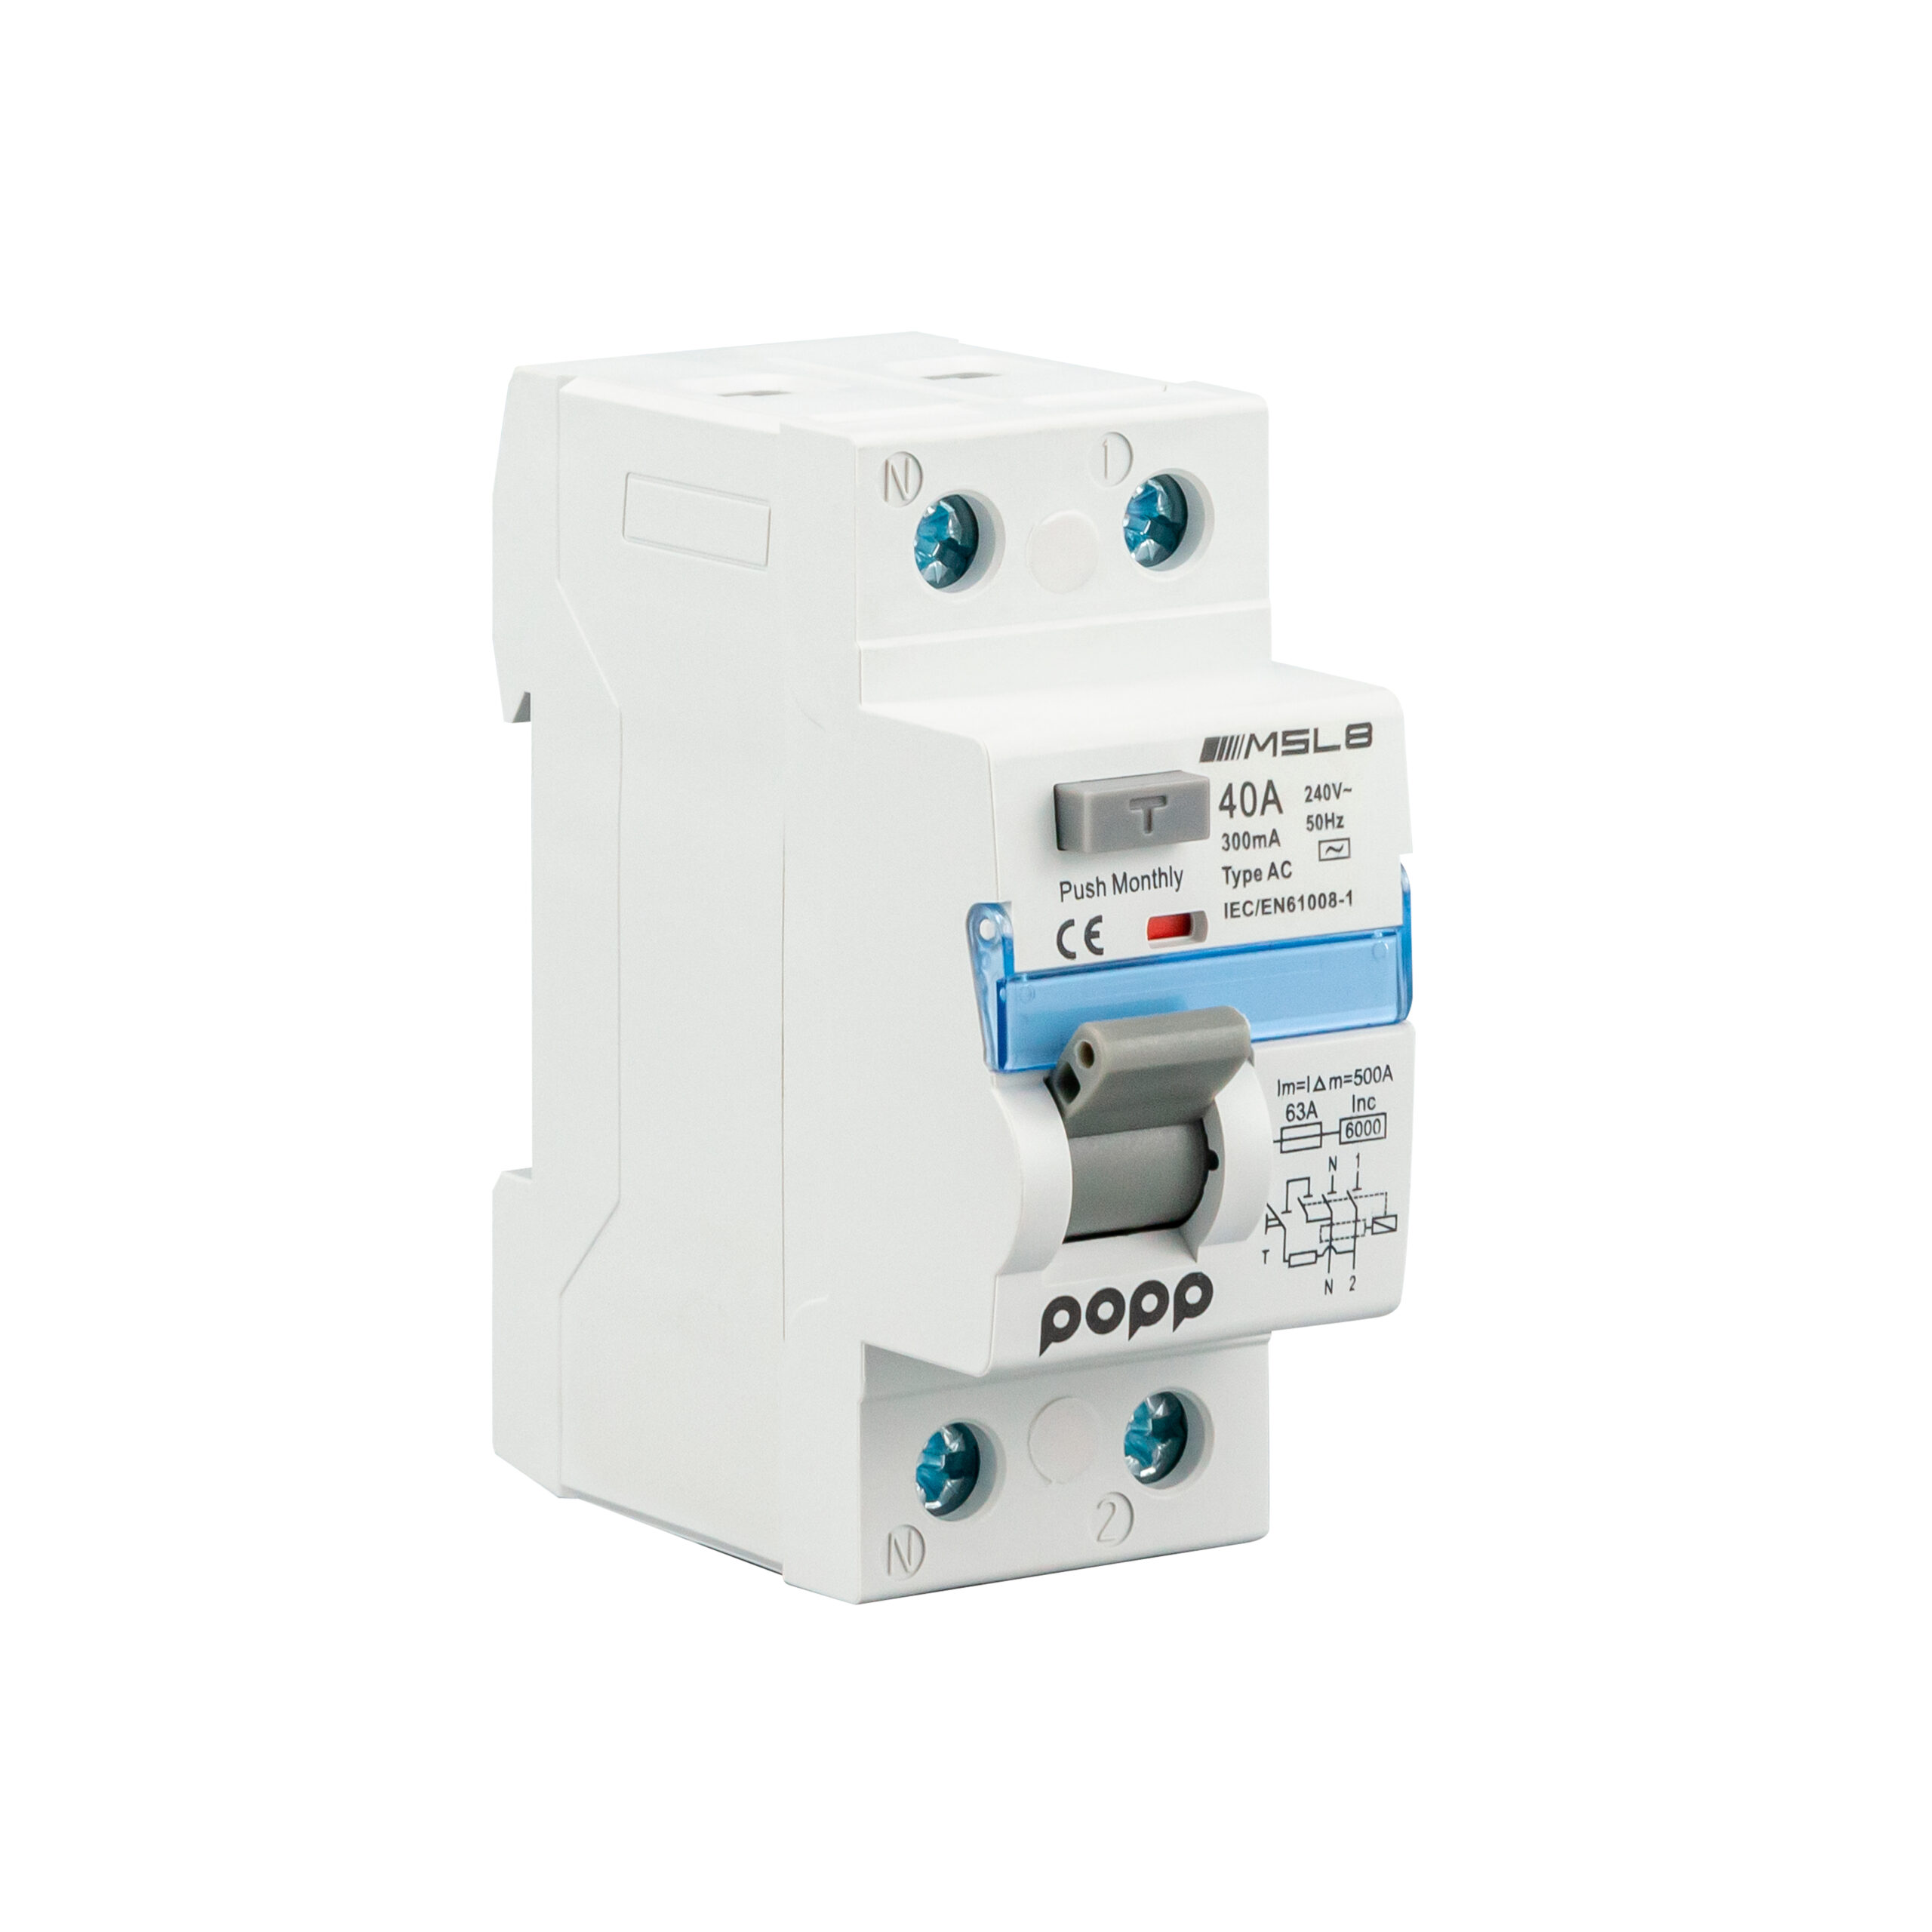 Interruptor 1P+N 40A 300mA diferencial serie MSL8 gama industrial